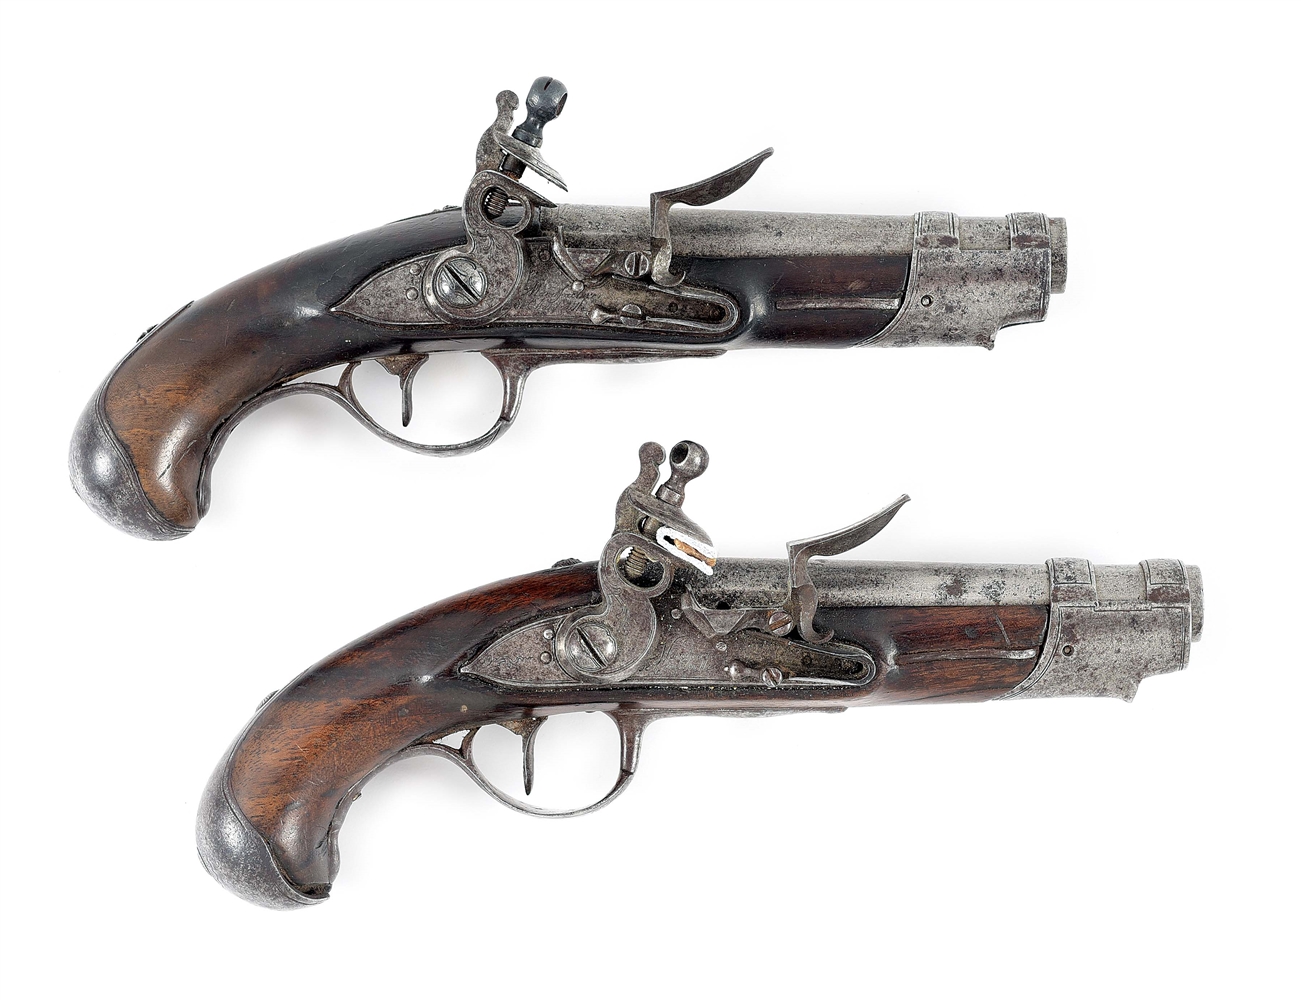 (A) A PAIR OF FRENCH MODEL 1770 MARECHAUSSEE OFFICER PISTOLS, BARRELS WITH THE ROYAL ARMS OF FRANCE.